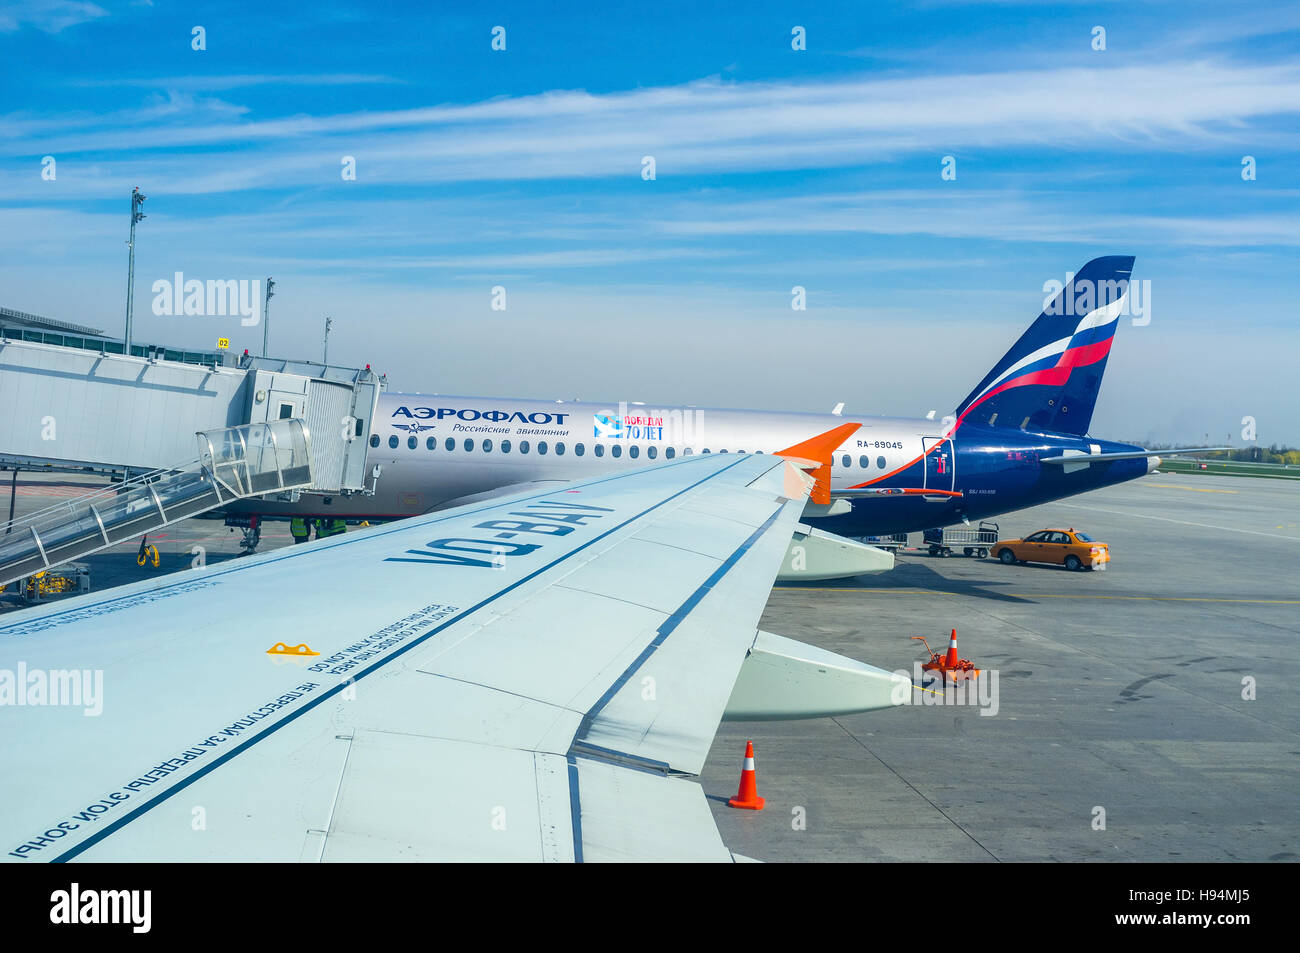 The silver aircraft of Aeroflot airlines is preparing for departing from Boryspil airport Stock Photo